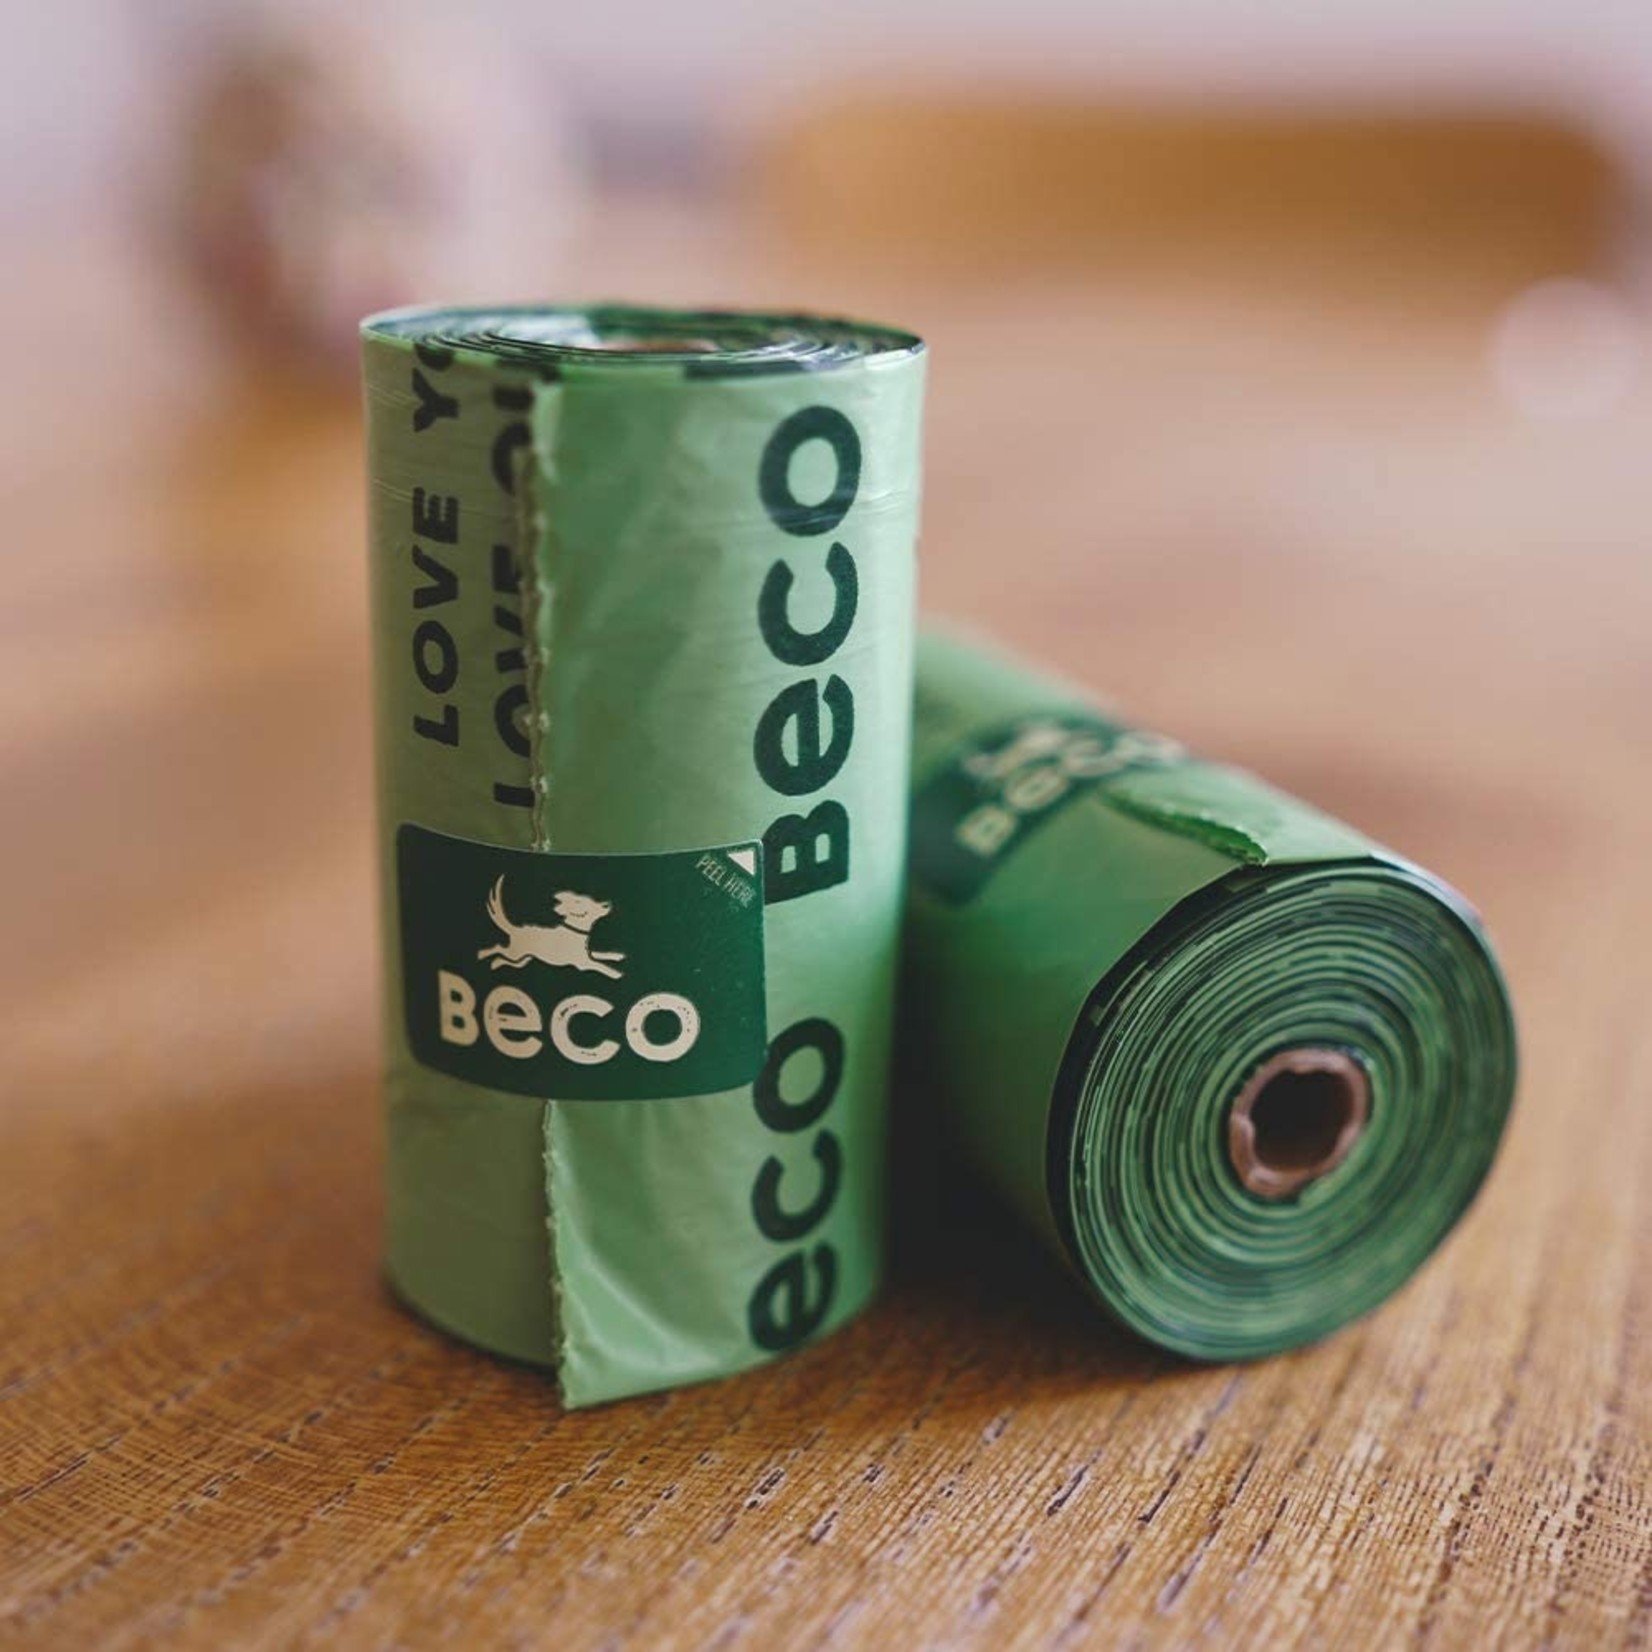 Beco Pets Beco Super Strong Degradable Poop Bags